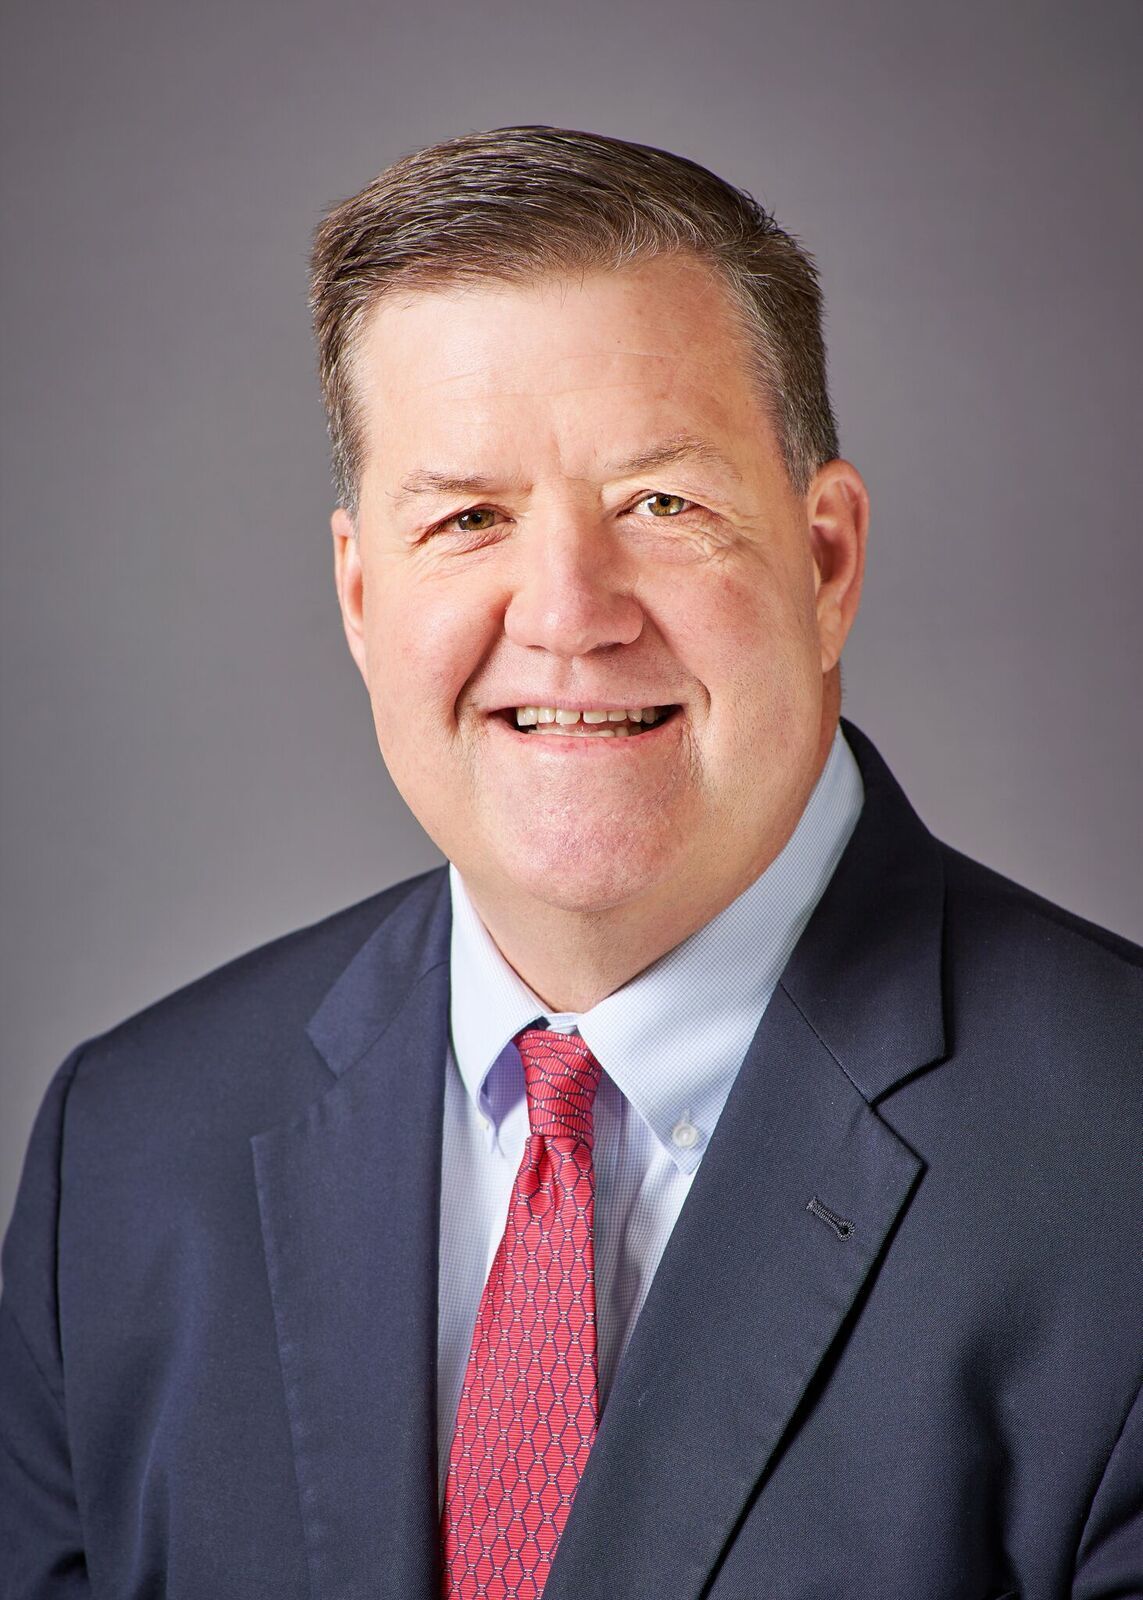 Jim O'Leary, Haskell president and CEO